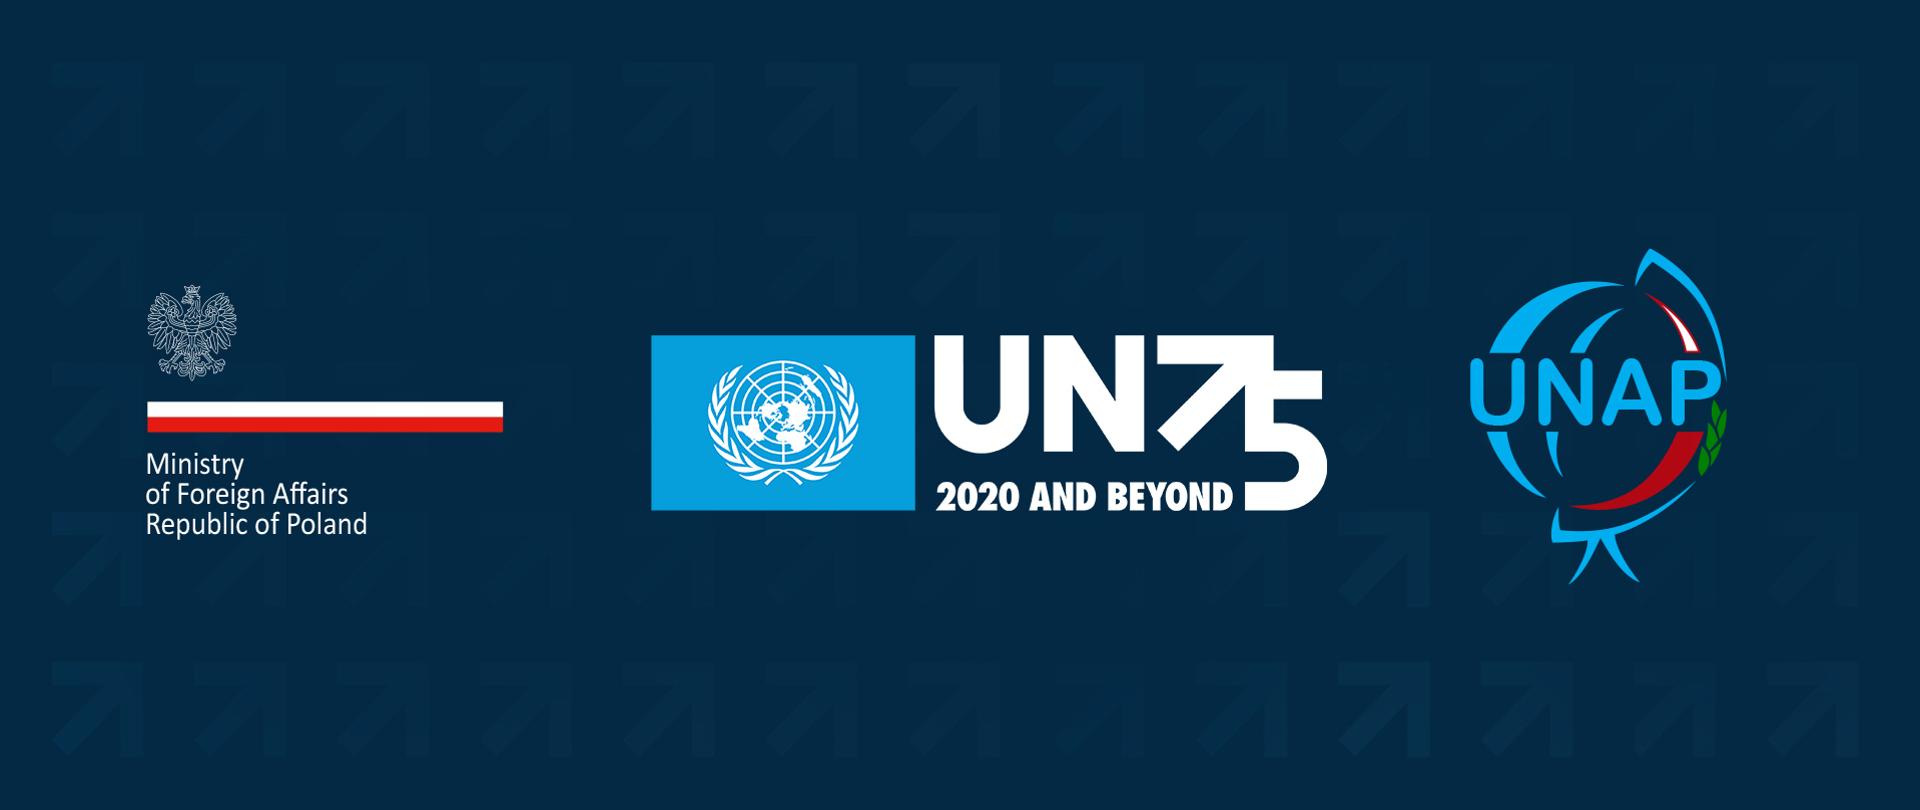 UN Week – 75 anniversary of the United Nations